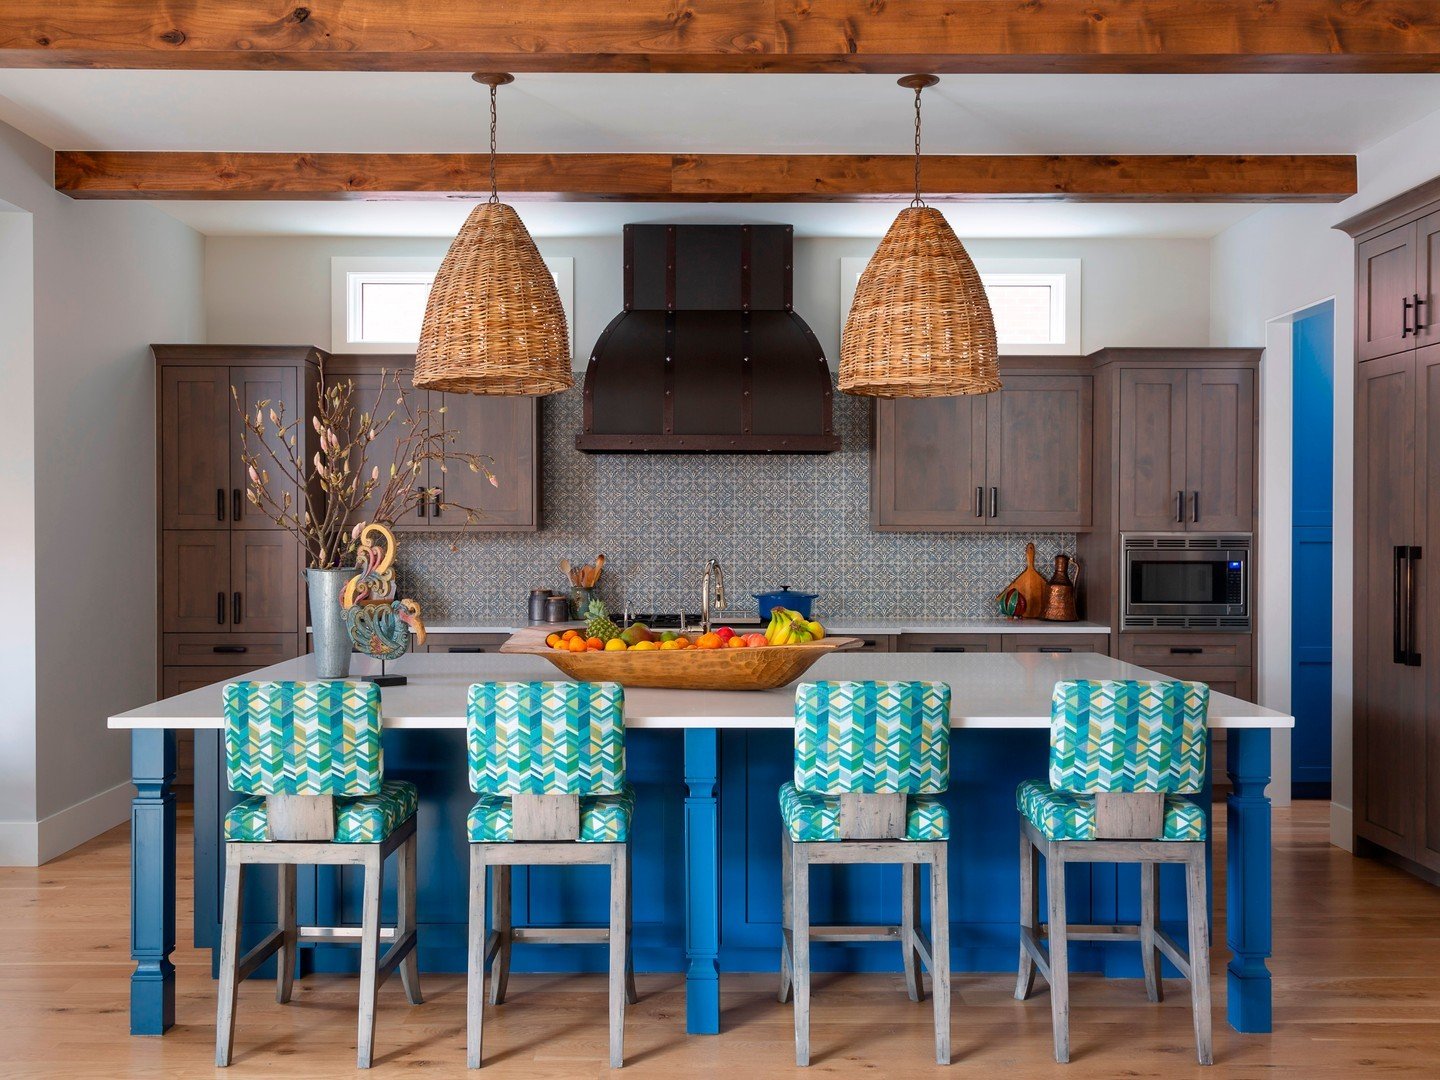 In case the island's scale wasn't enough to capture your attention, we coated it in a bright blue for extra measure. Bold and unexpected color -- it's what we do 💙

--
project: Earthy Wash Park New Build
interior design: Atelier Interior Design | De